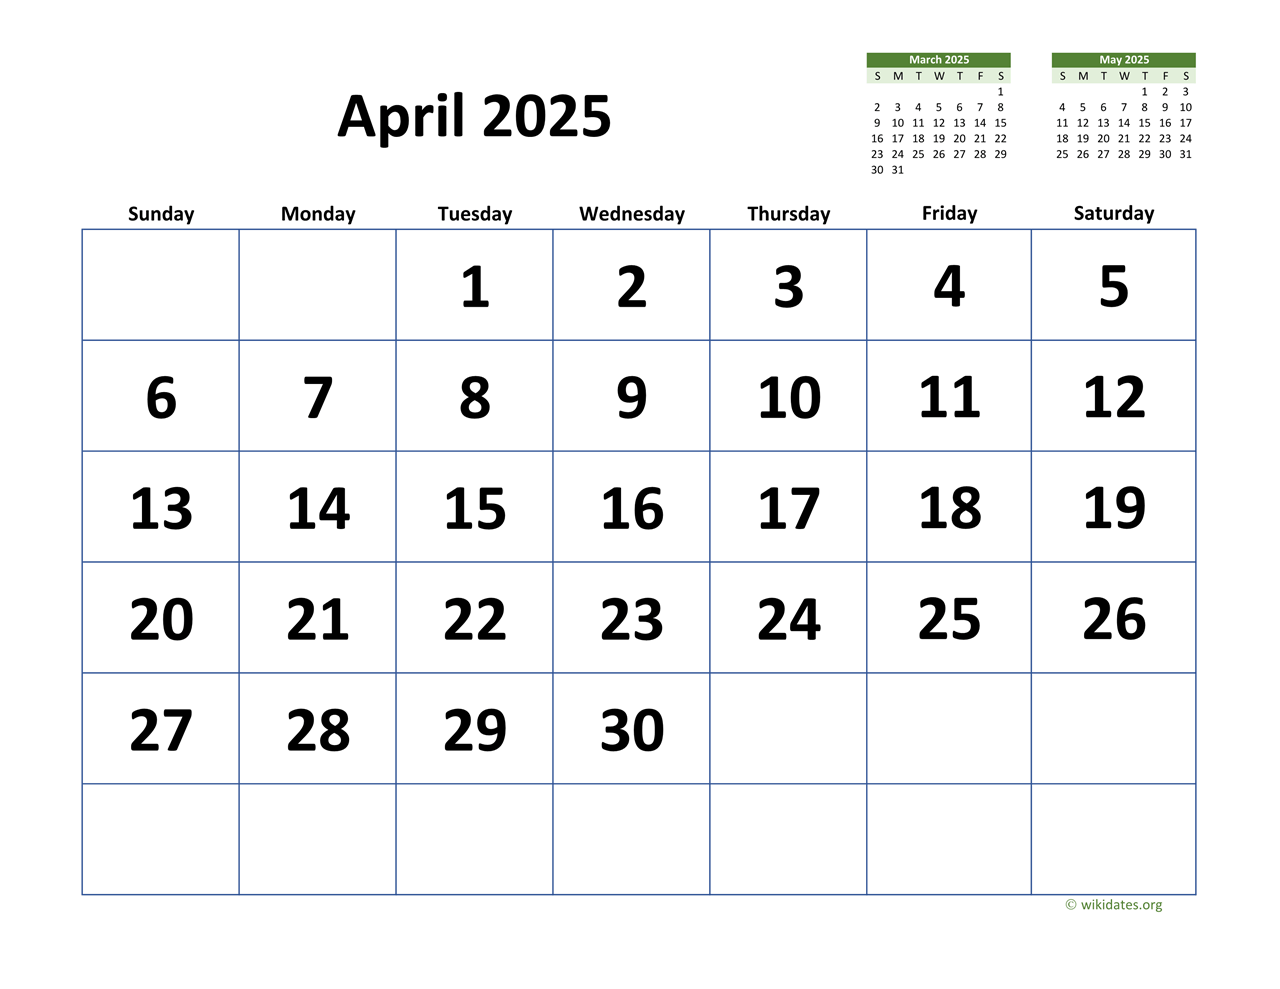 April 2025 Calendar with Extra-large Dates  WikiDates.org